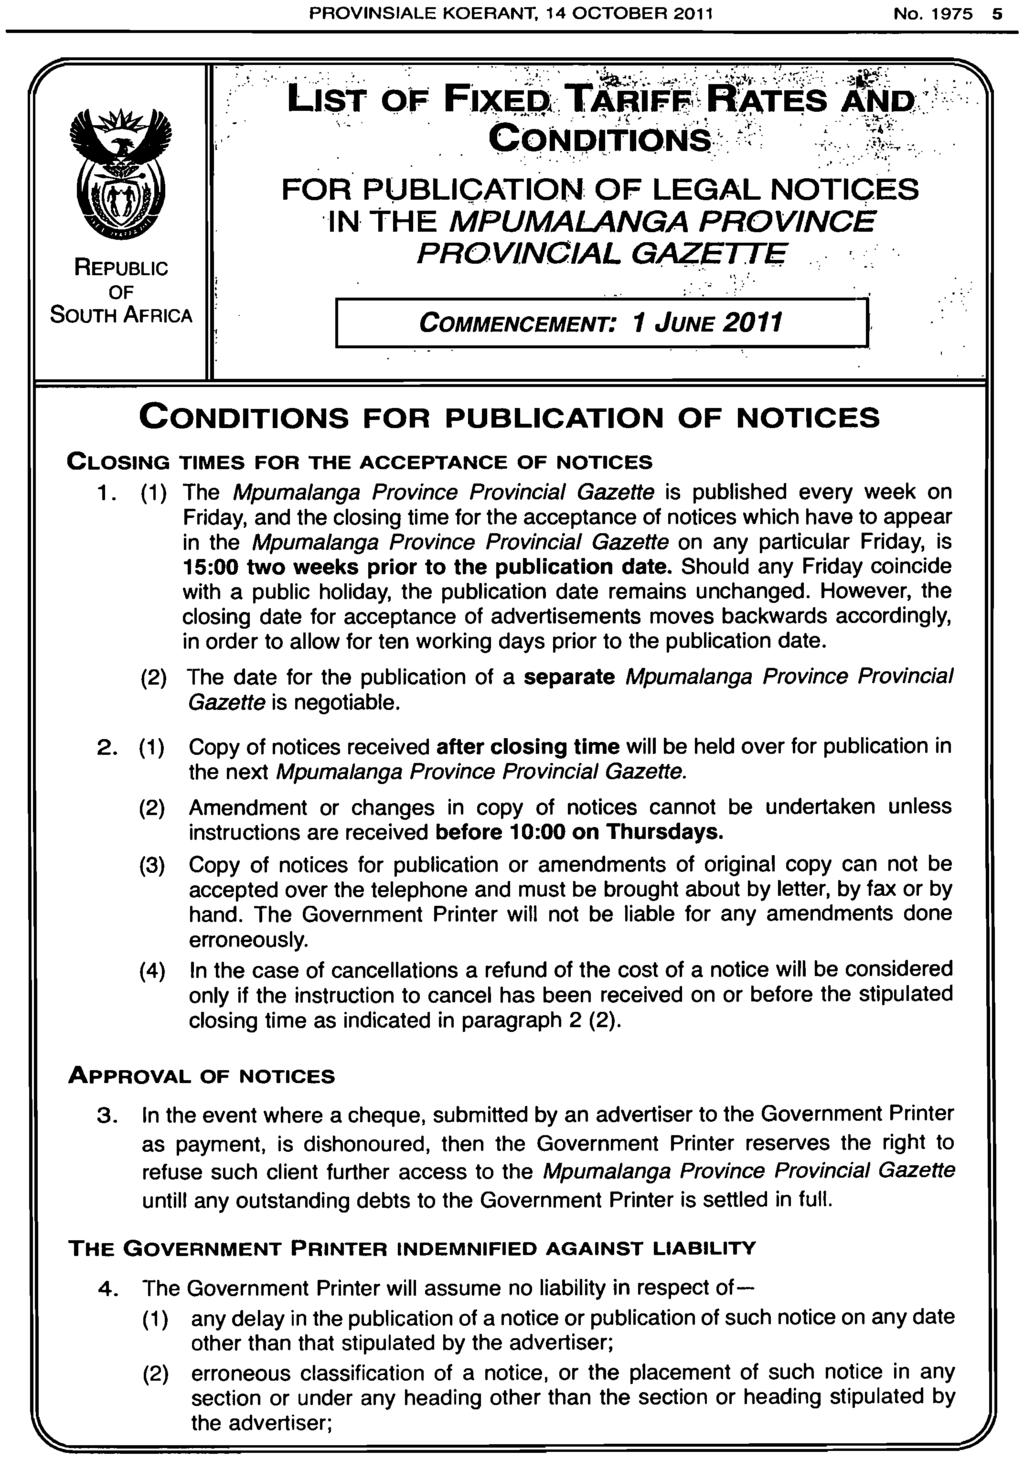 PROVINSIALE KOERANT. 14 OCTOBER 2011 No. 1975 5 REPUBLIC OF SOUTH AFRICA FOR' PUBLICATION: OF LEGAL NOTICES 'IN' "the MPUMALANGA PROVINCE PROVINCIAL GAZETTE.